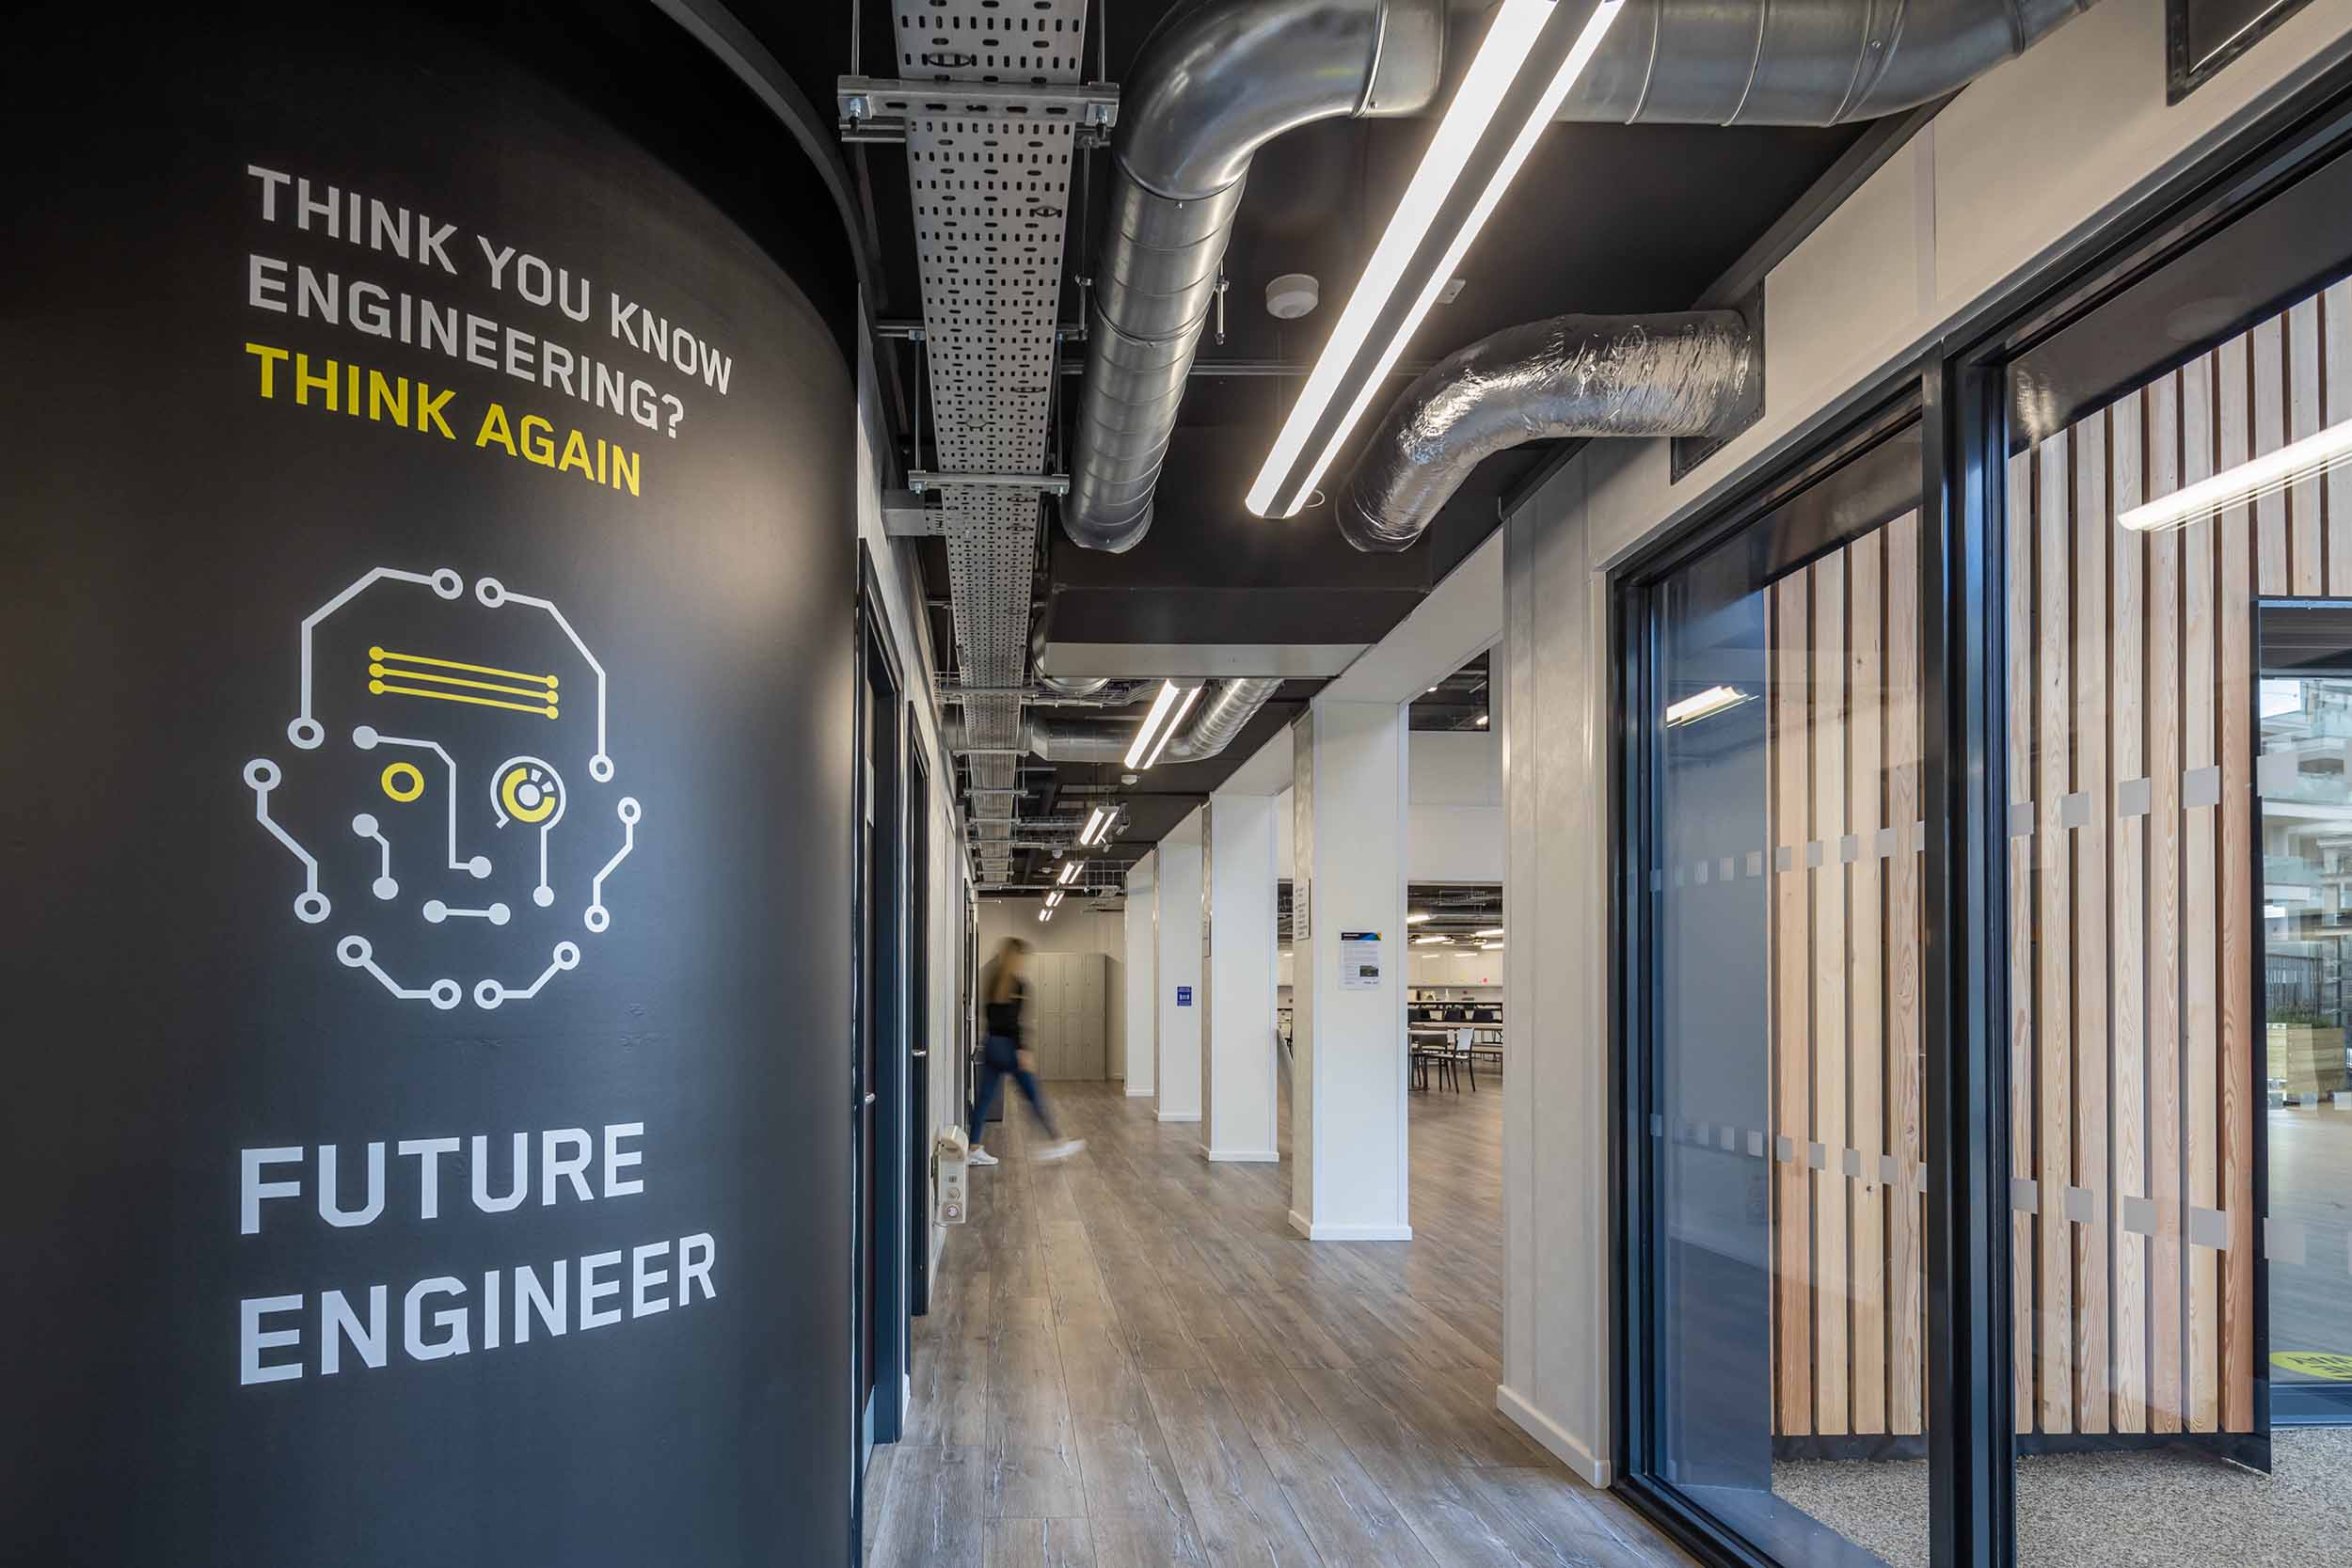 A view of a hallway within the TEDI-London building with a wall containing the words "Think you know Engineering? Think Again. Future Engineer" and a robotic face graphic